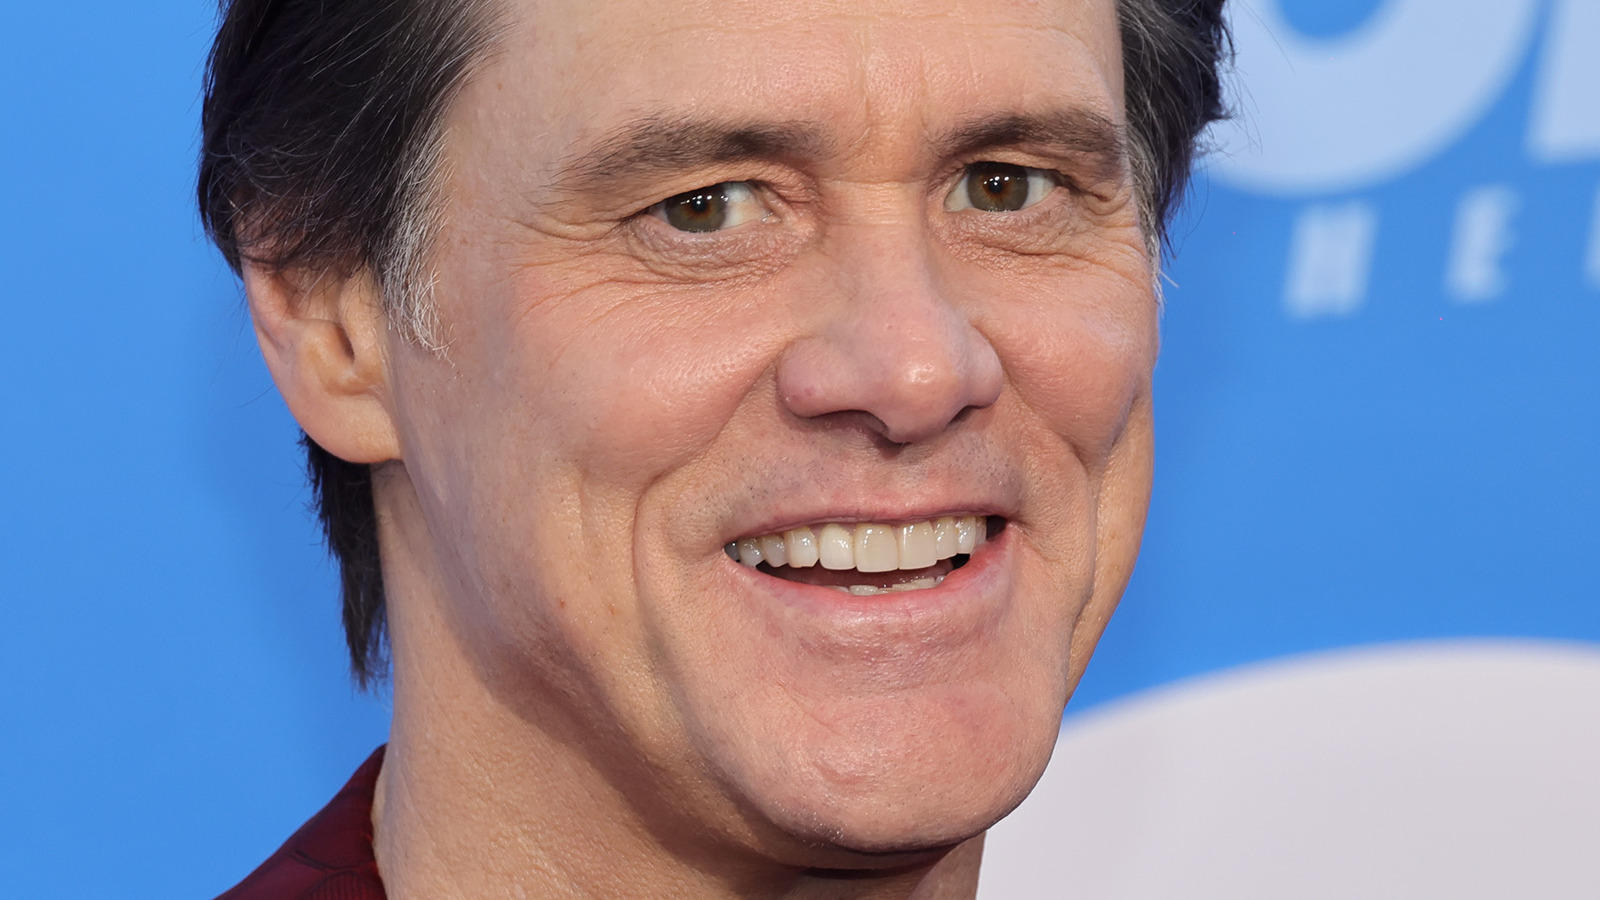 Jim Carrey makes an eerie appearance in The Weeknd's new music video